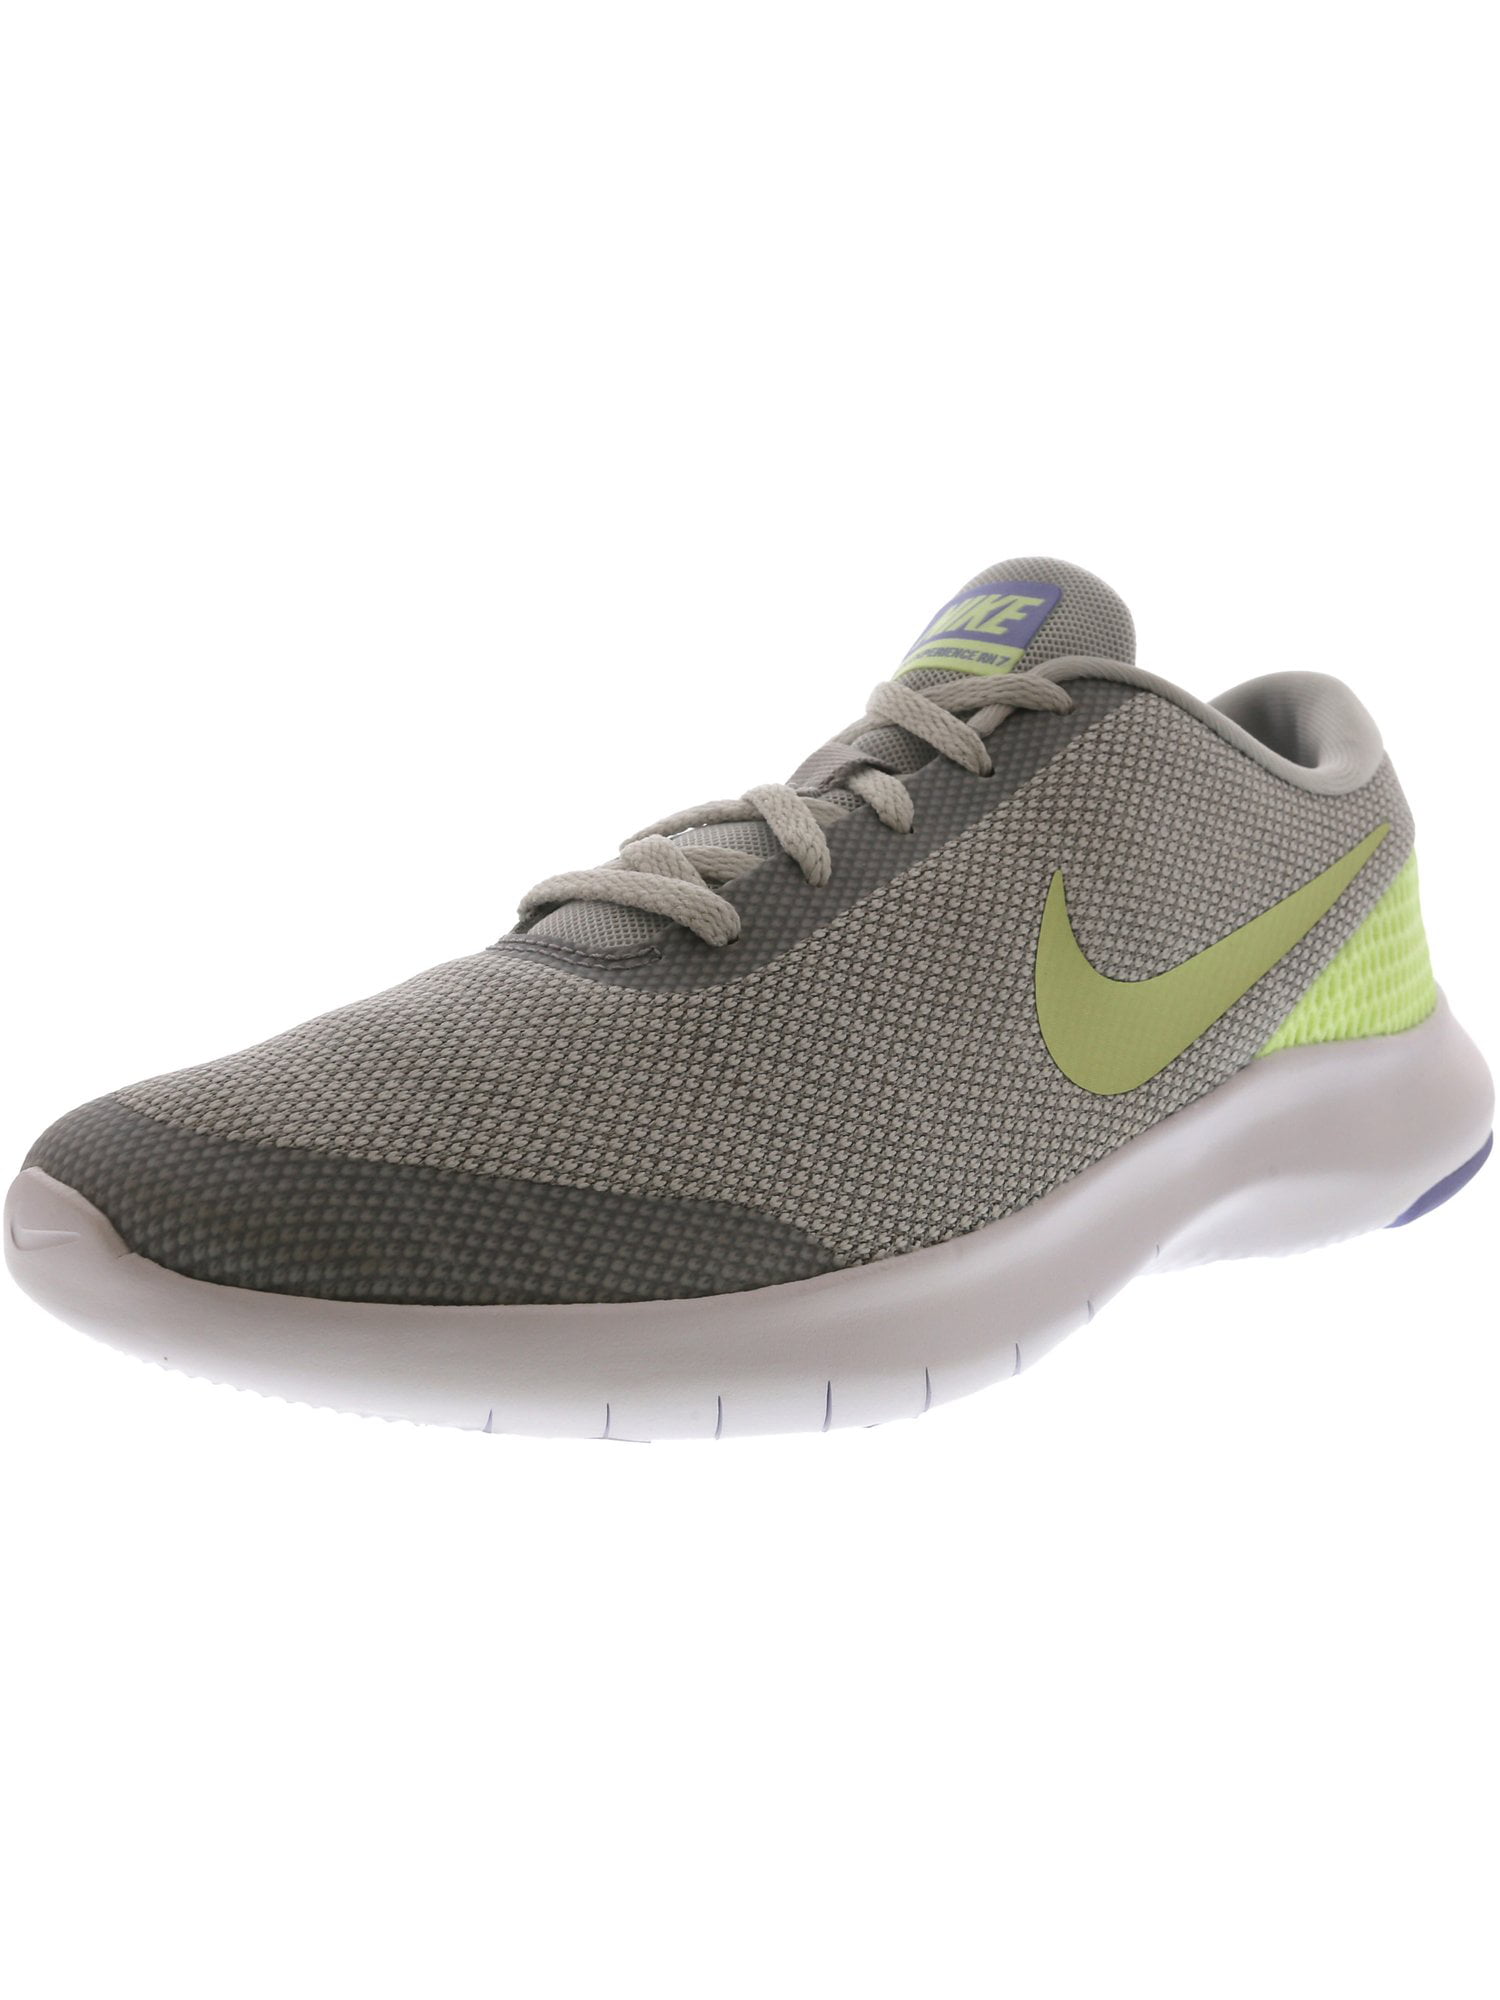 Nike Womens Flex Experience Rn 7 Pure Platinum Barely Volt Ankle